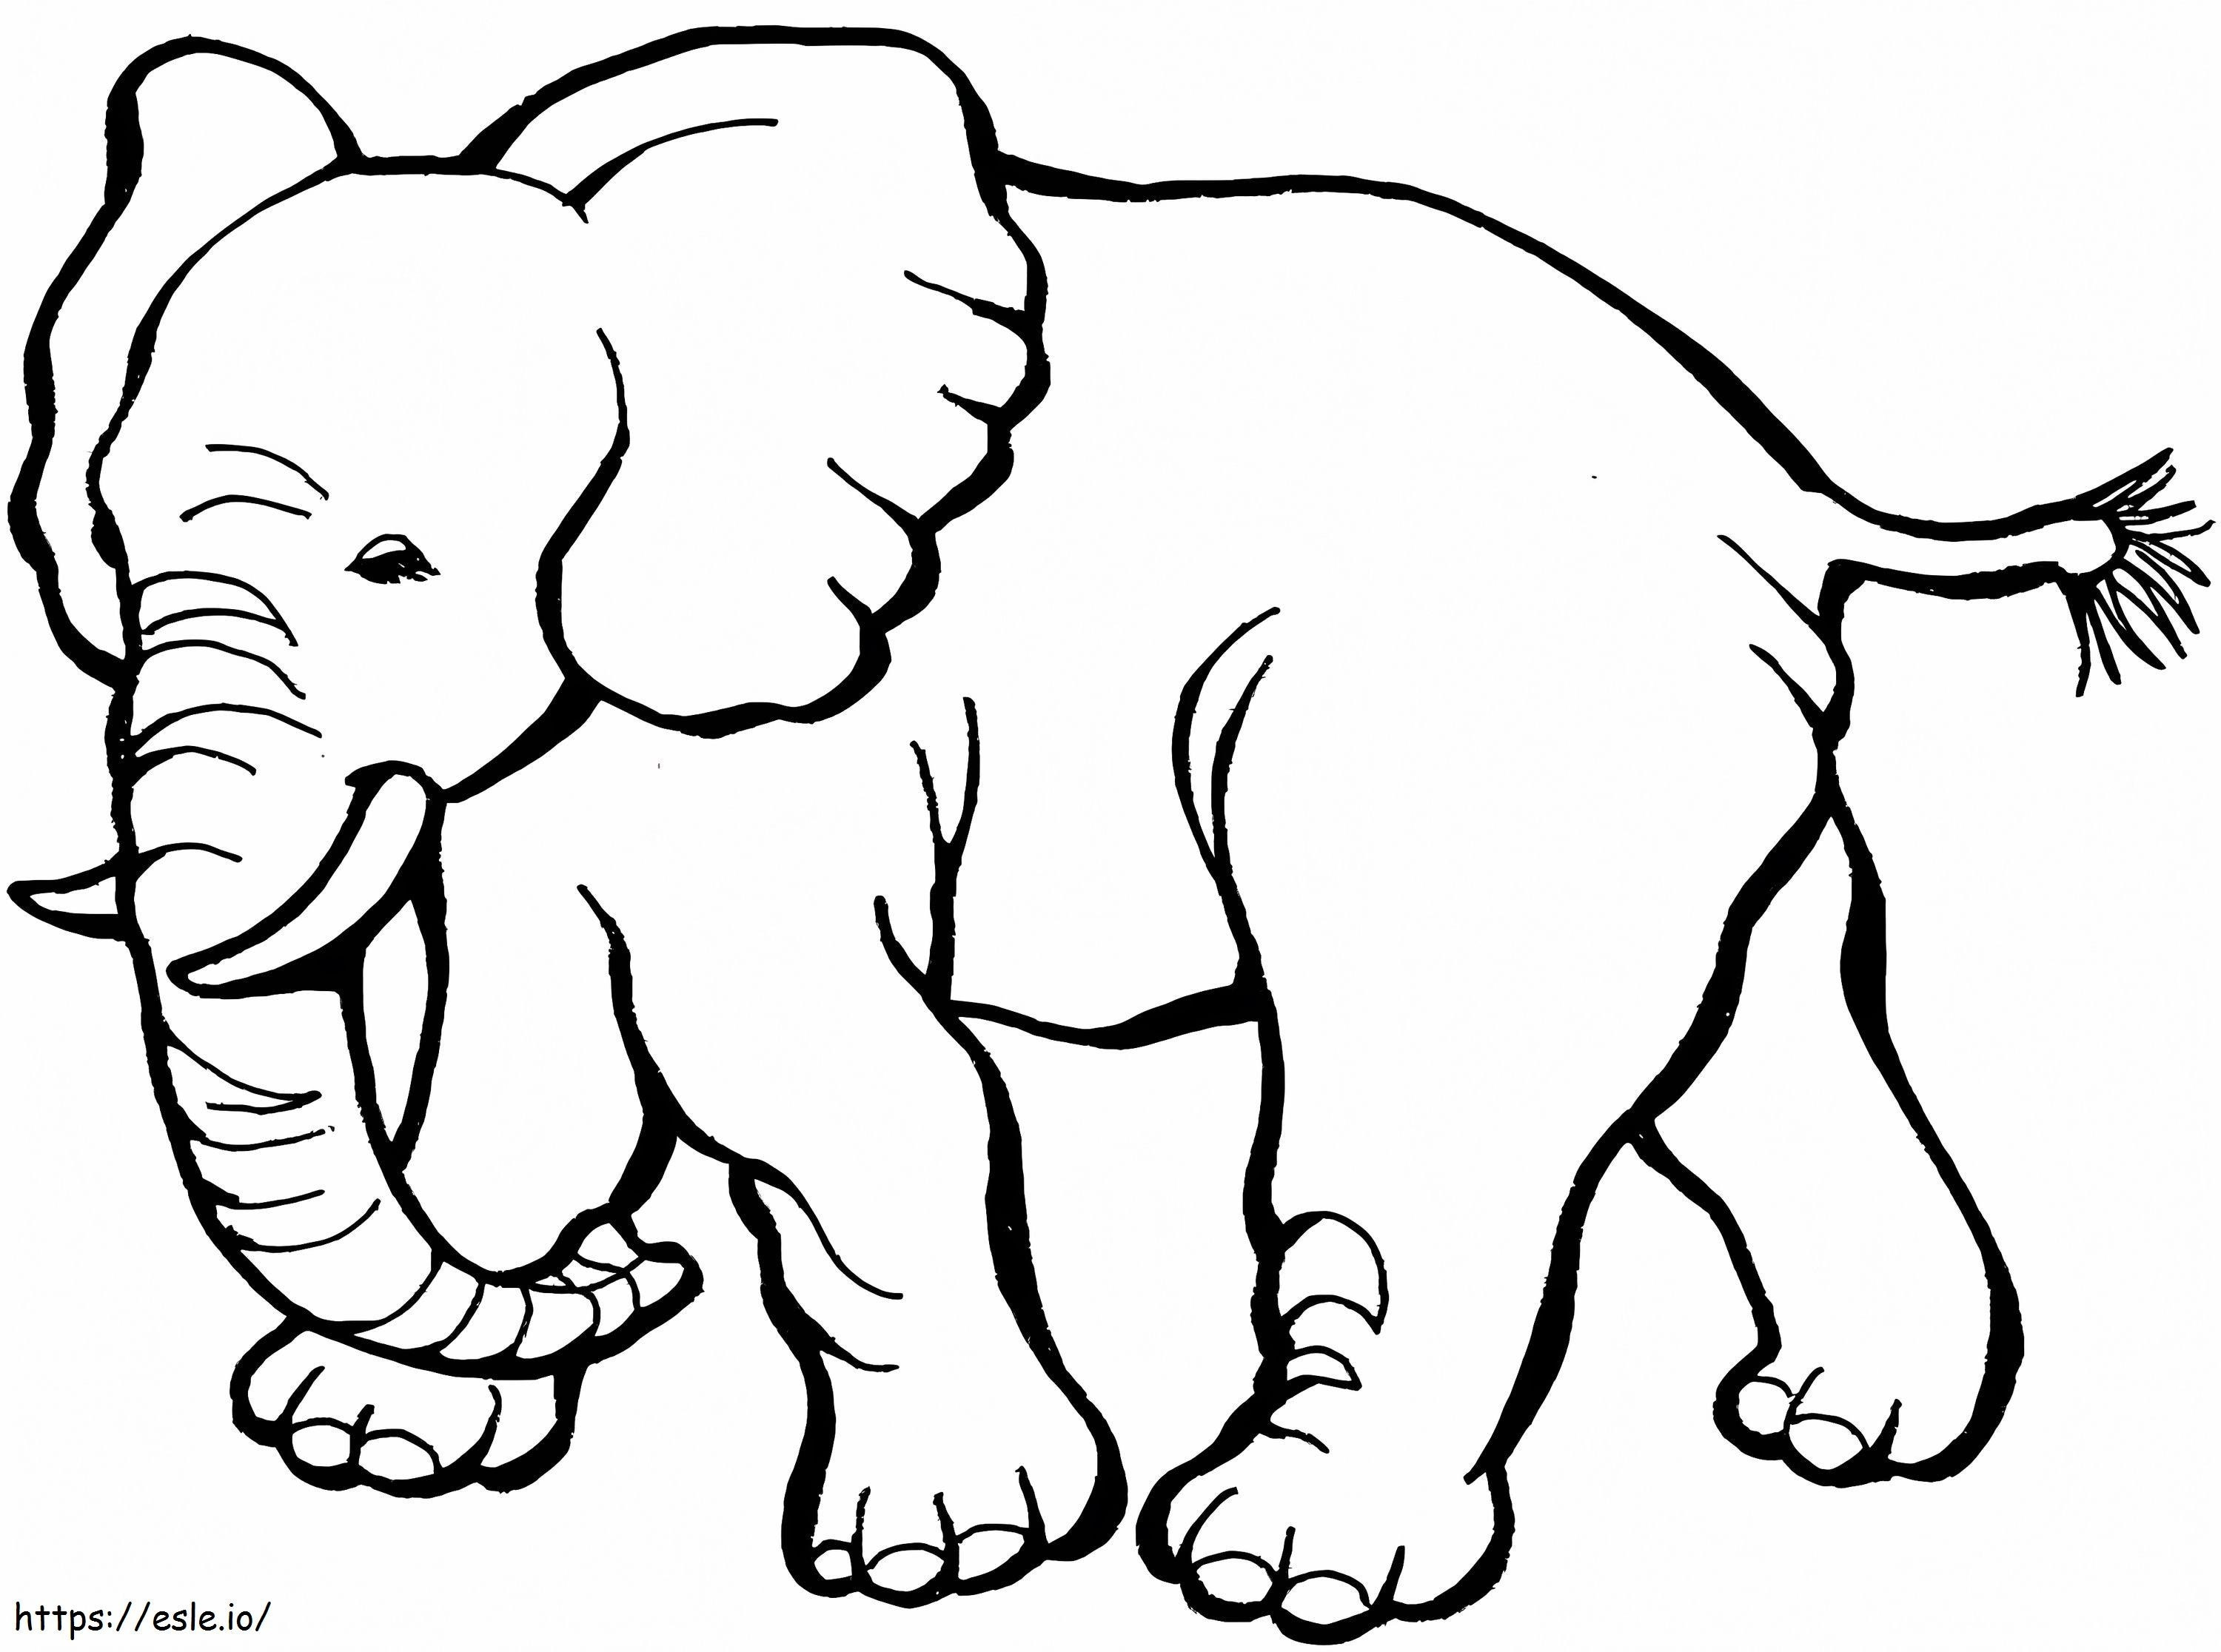 Elephant 1 coloring page